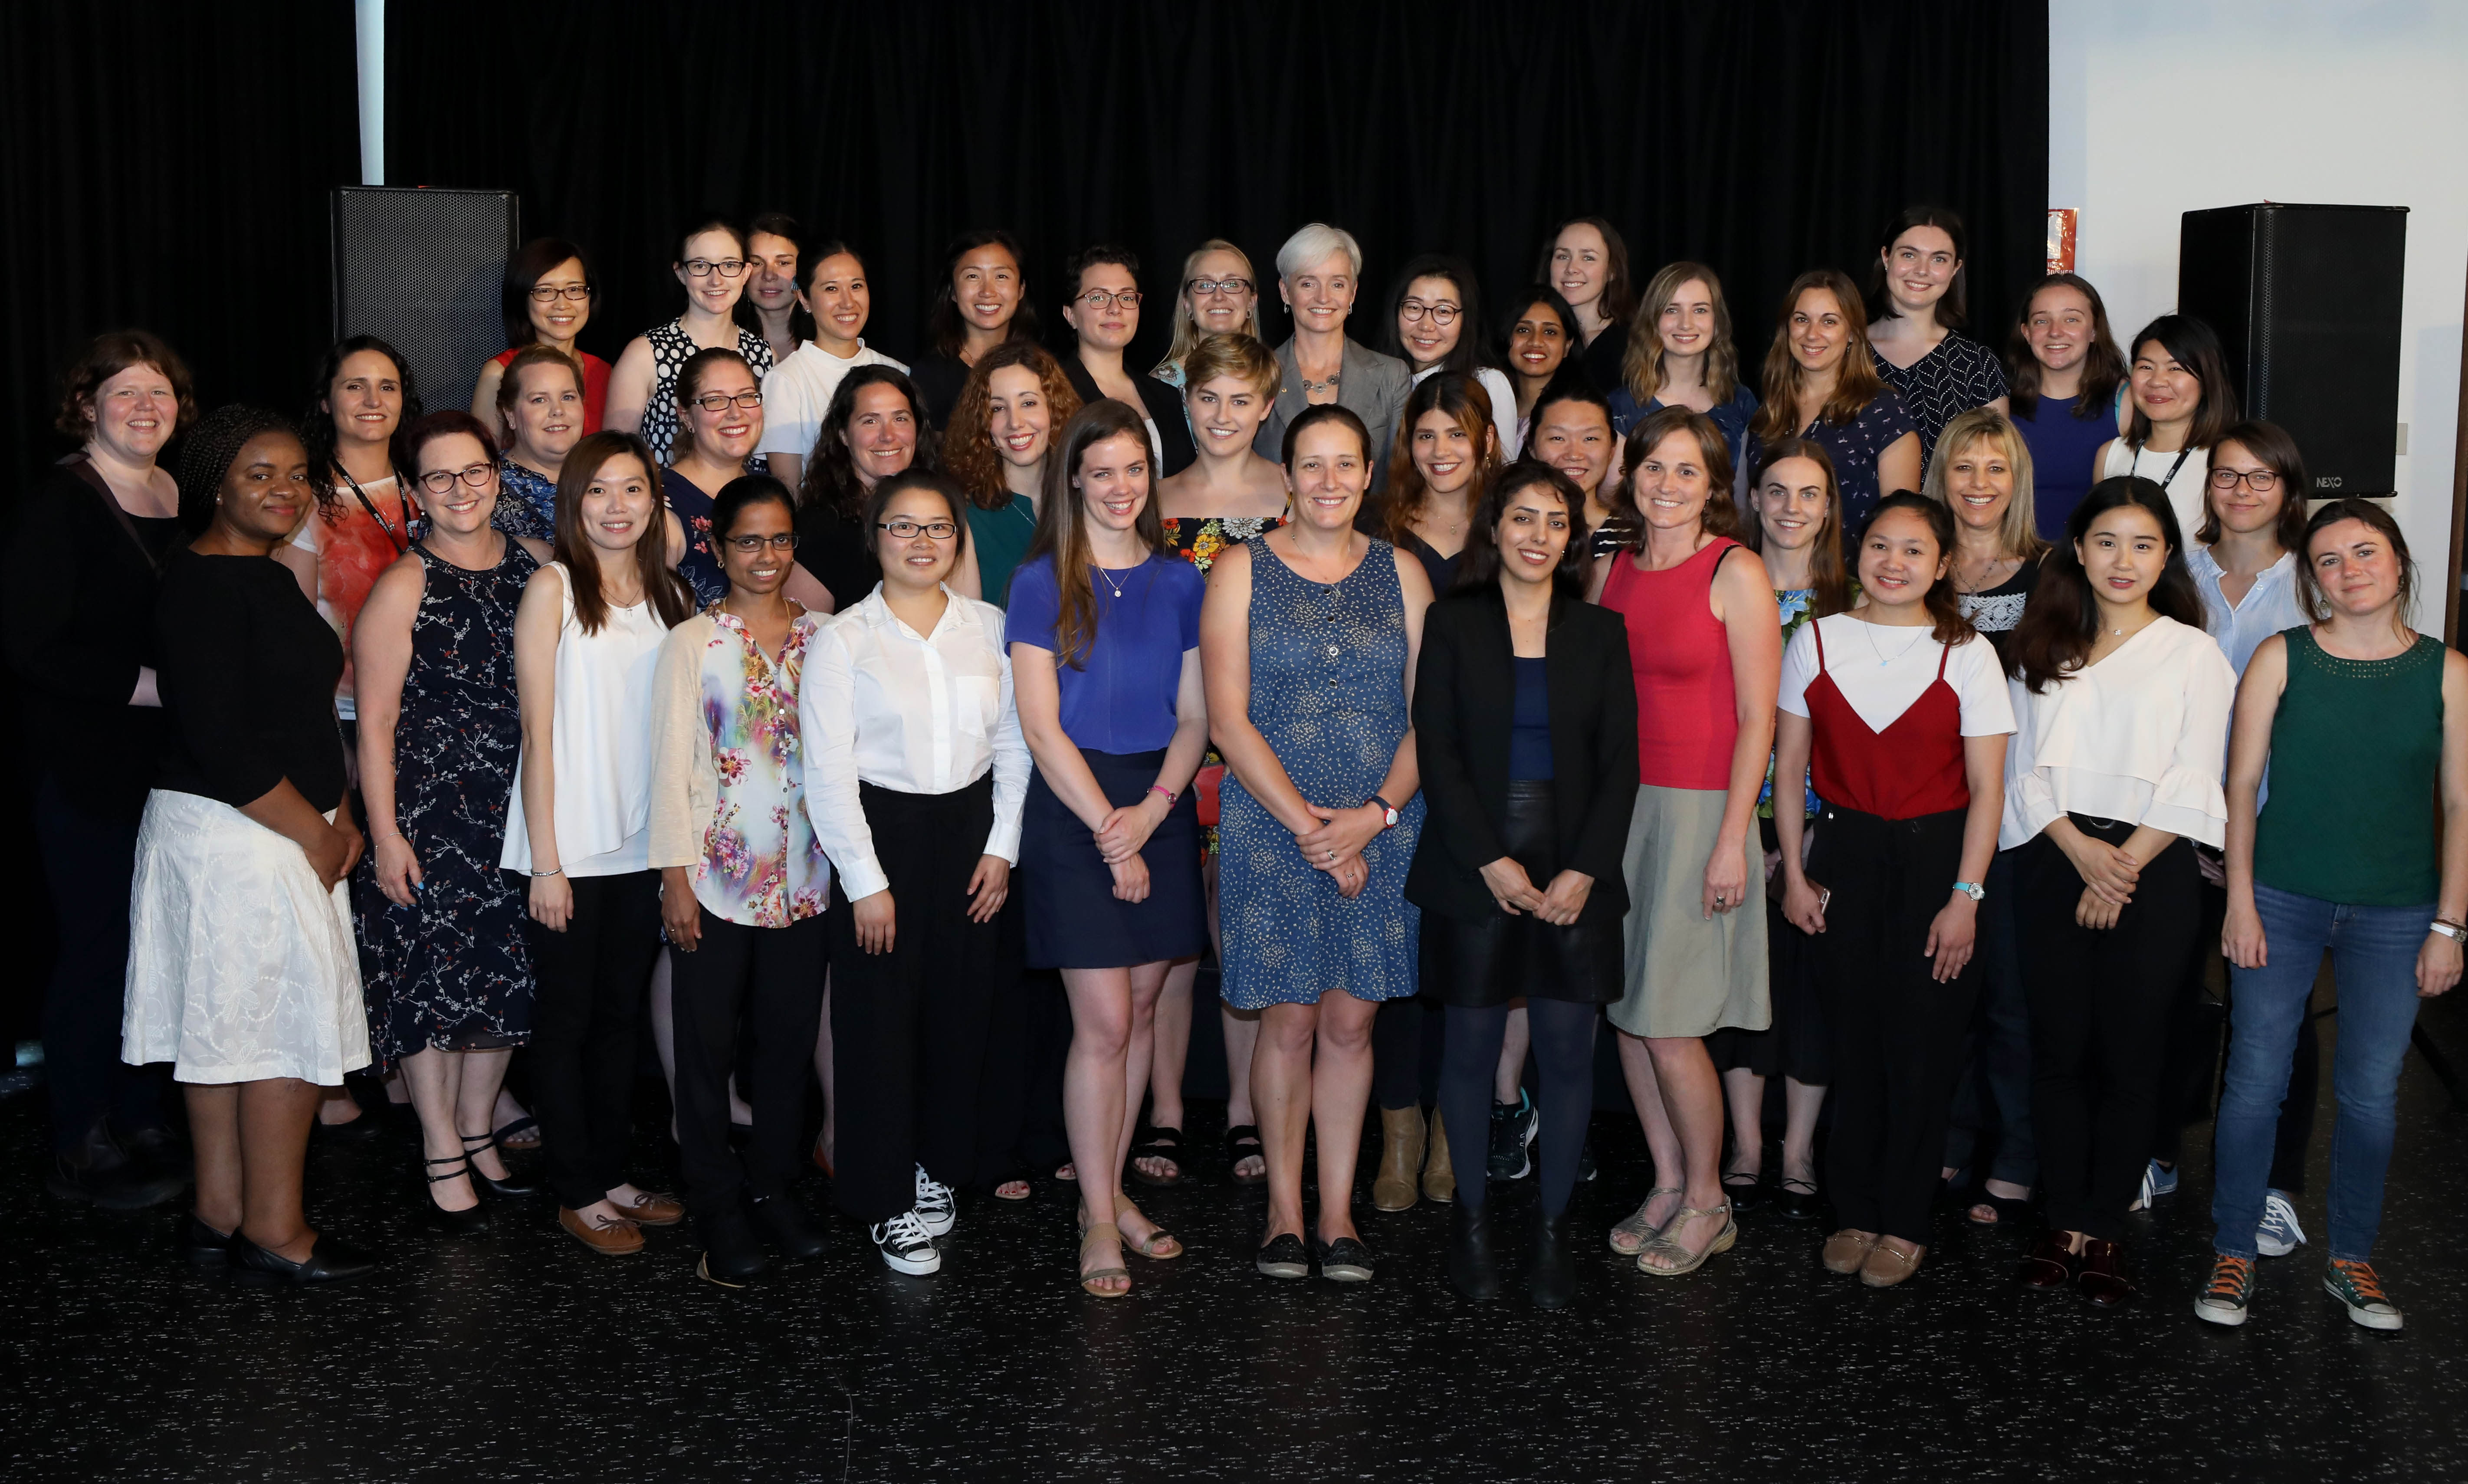 About the UNSW Women in Maths and Science Champions Program Blog